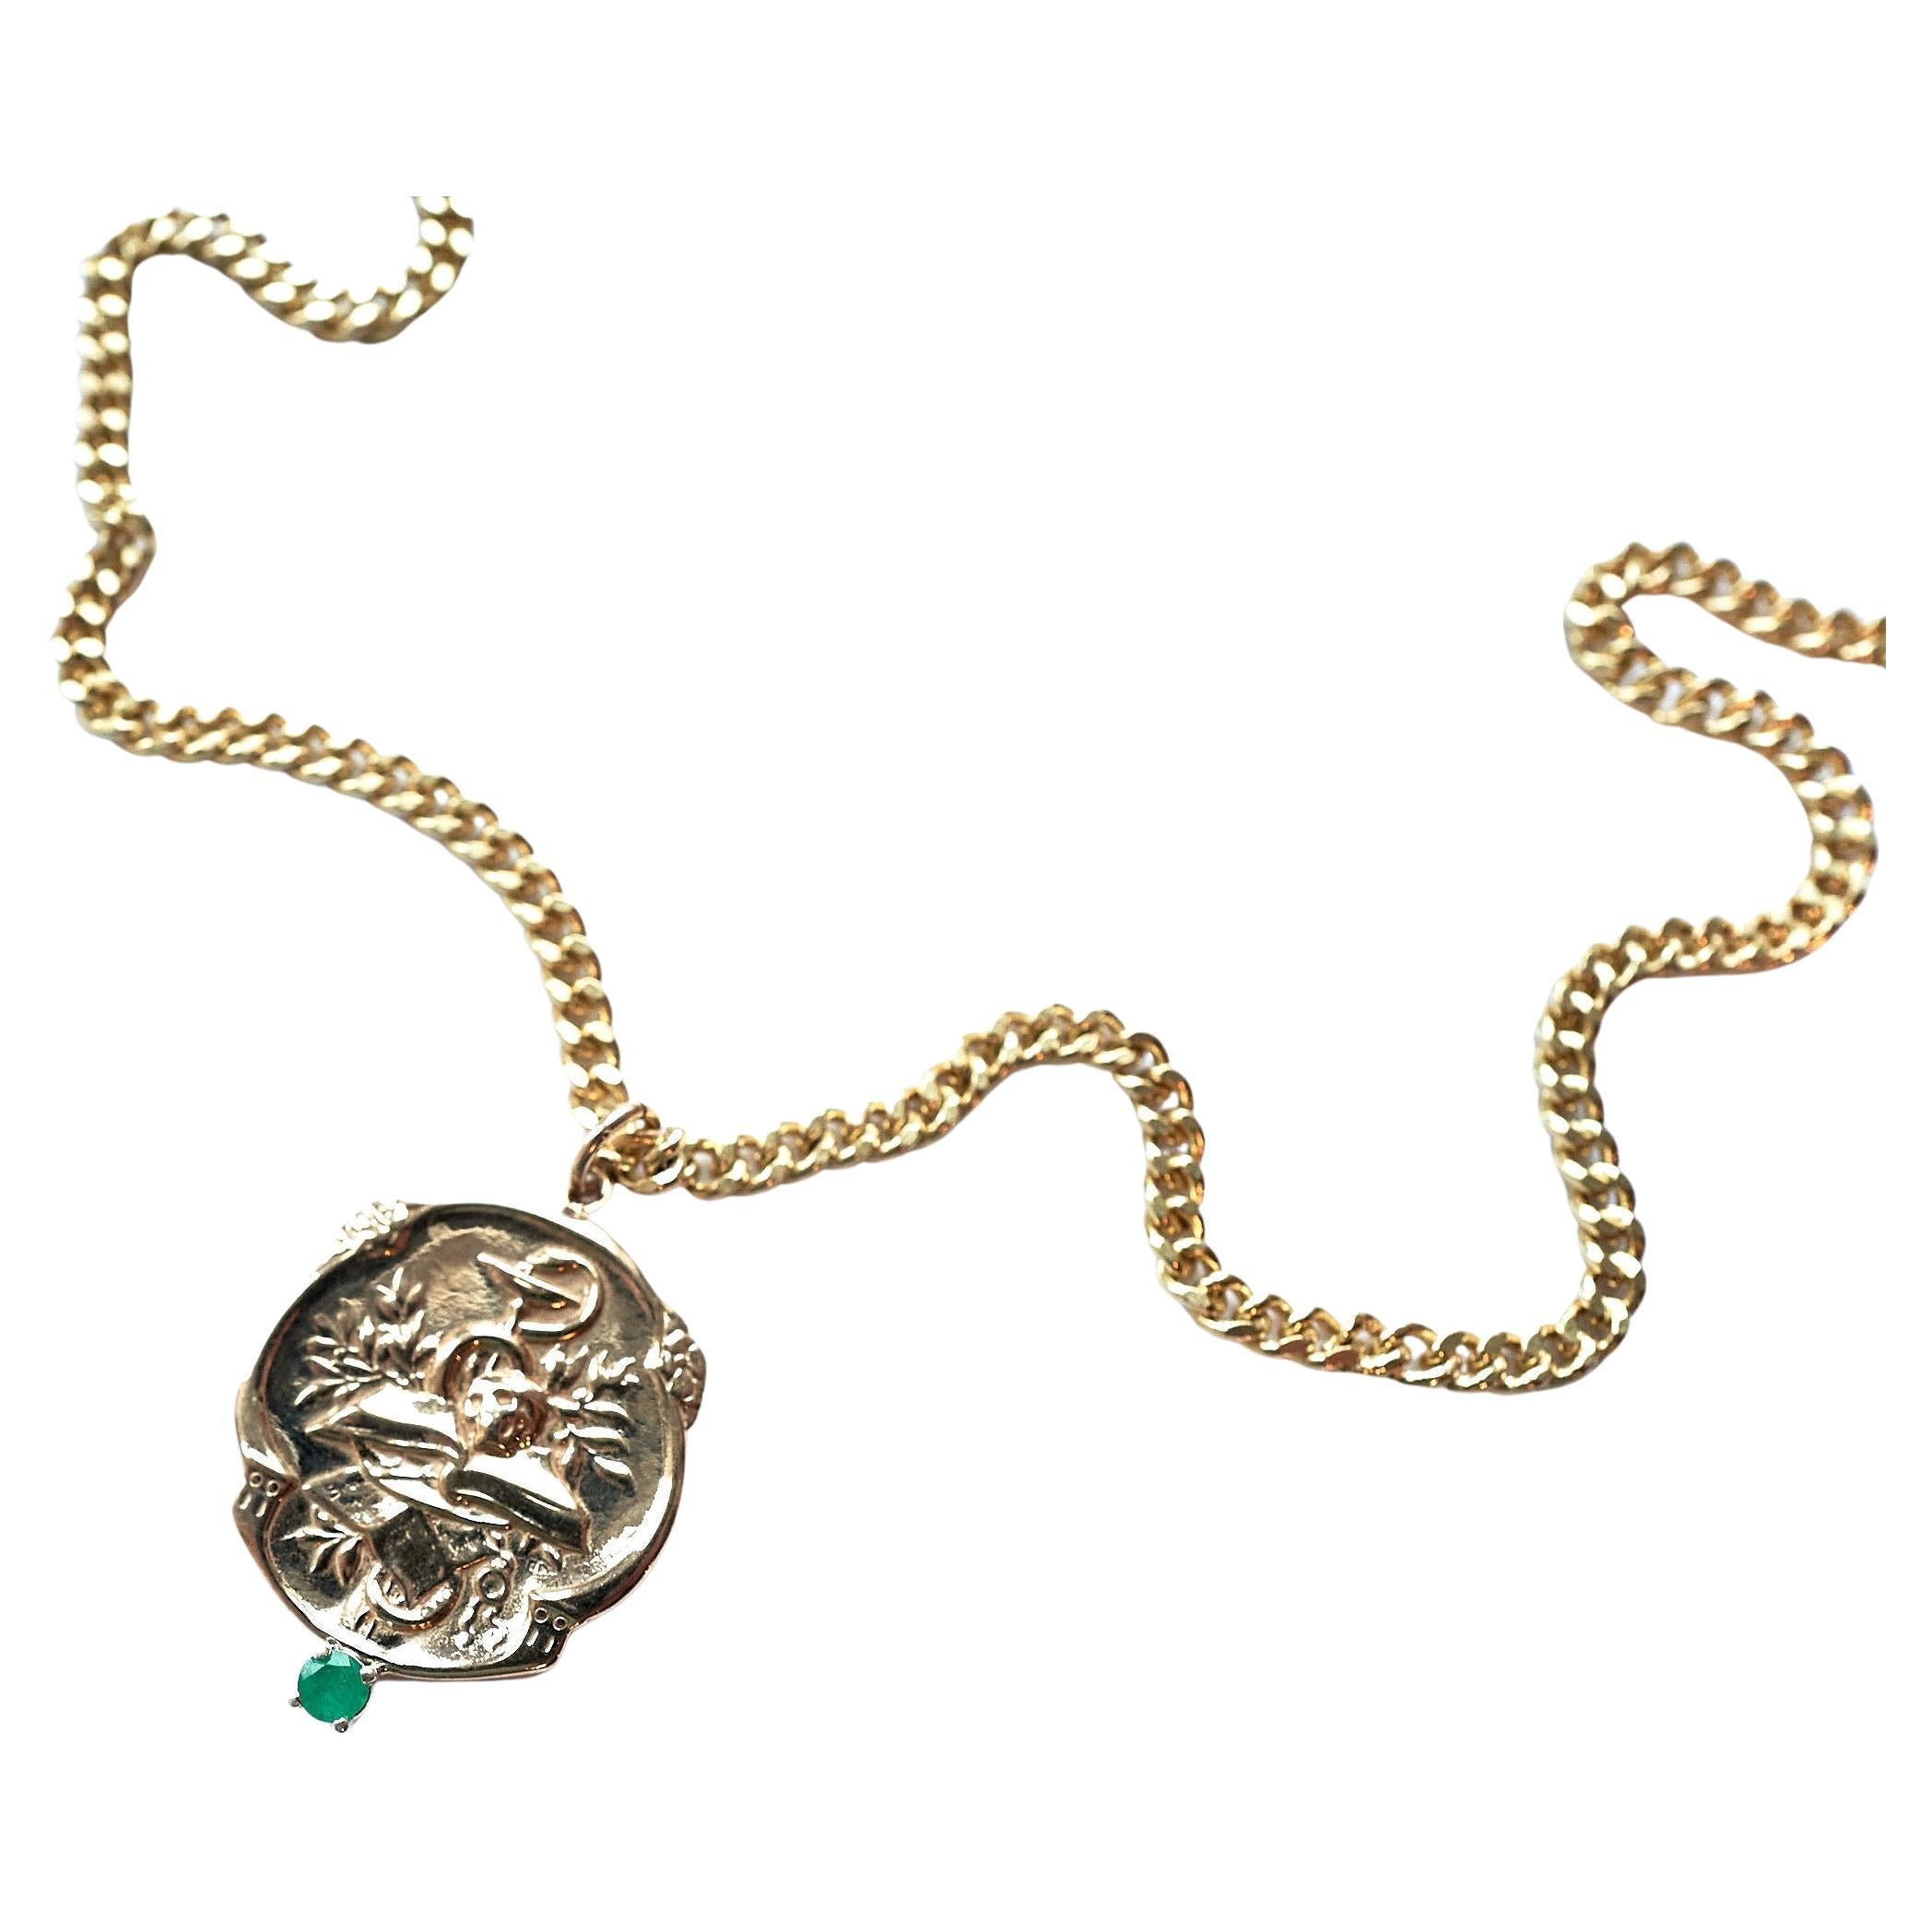 Emerald Victorian Style Memento Mori Medal Necklace Skull Chain J Dauphin
Gold Plated Brass Chain and Bronze Medal

Symbols or medals can become a powerful tool in our arsenal for the spiritual. 
Since ancient times spiritual pendants, religious